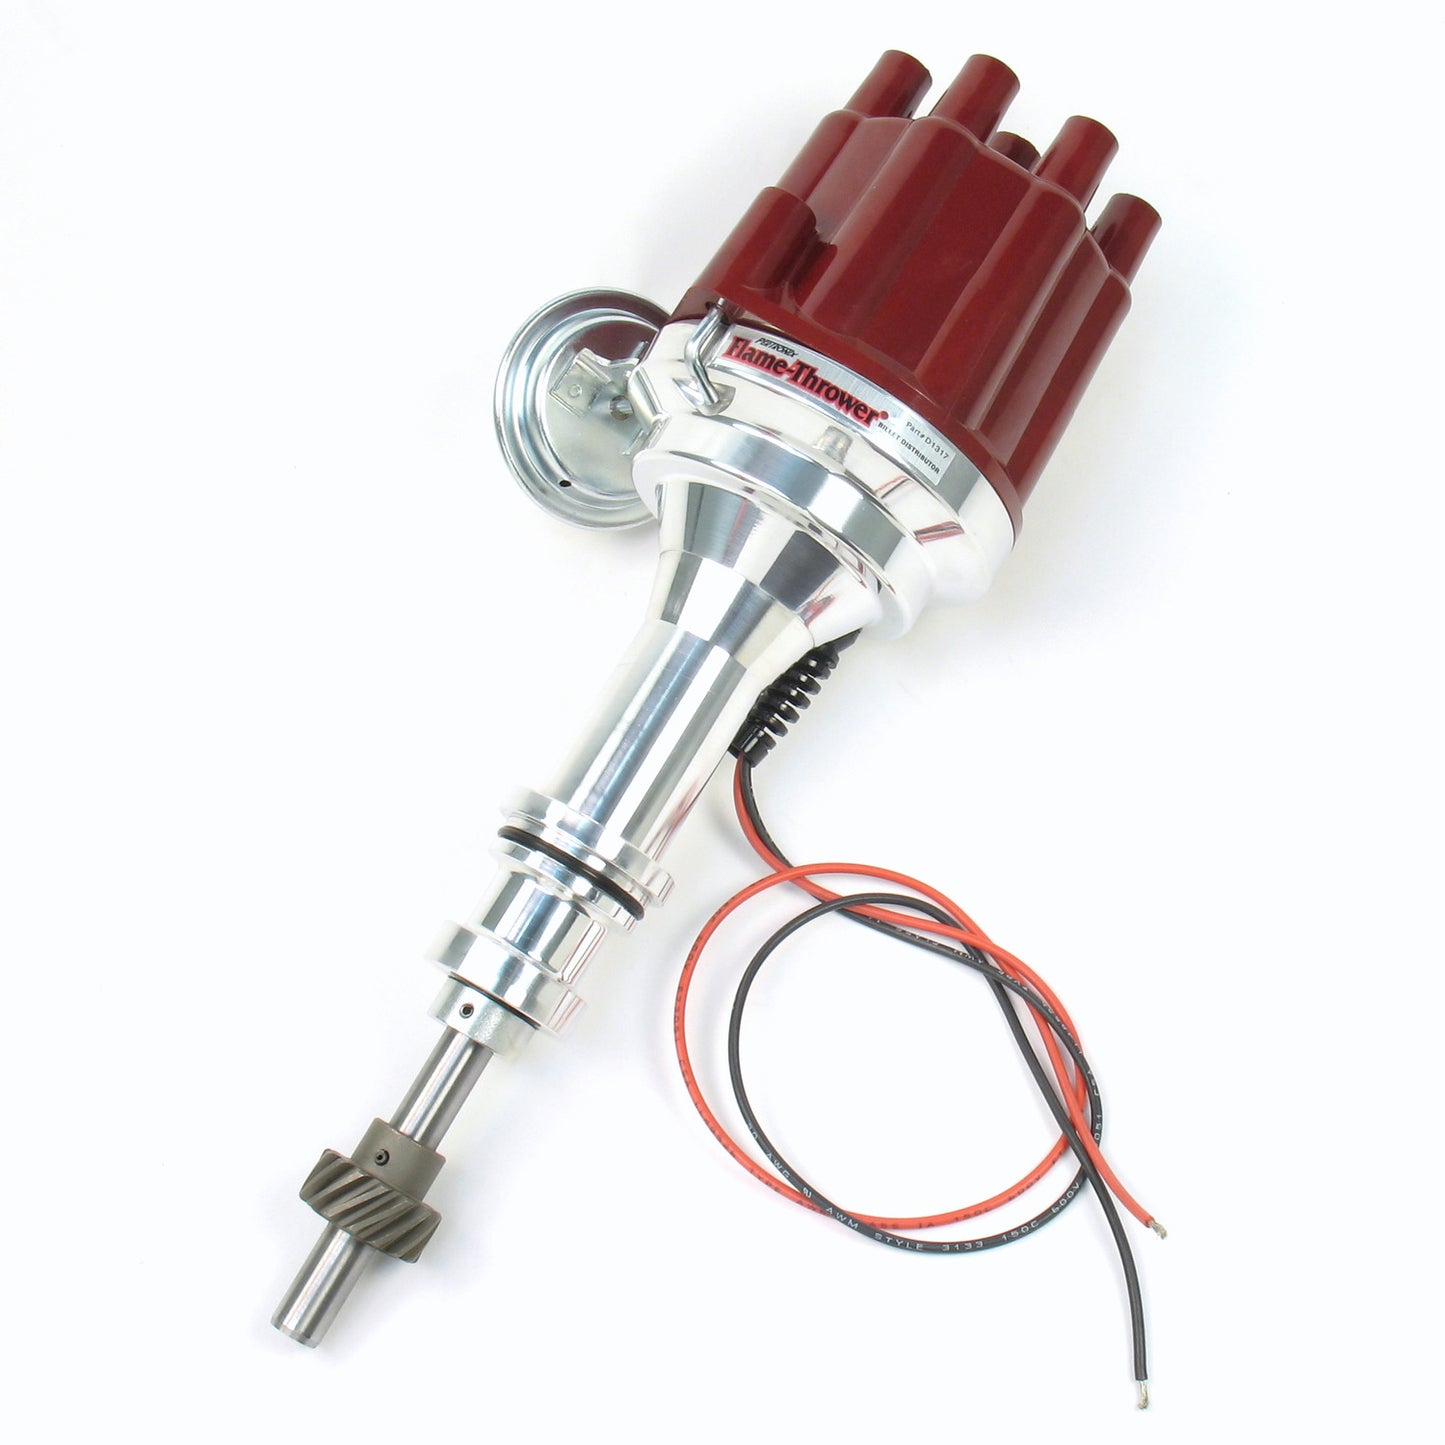 PerTronix D131701 Flame-Thrower Electronic Distributor Billet Ford 351W Plug and Play with Ignitor II Technology Vacuum Advance Red Cap